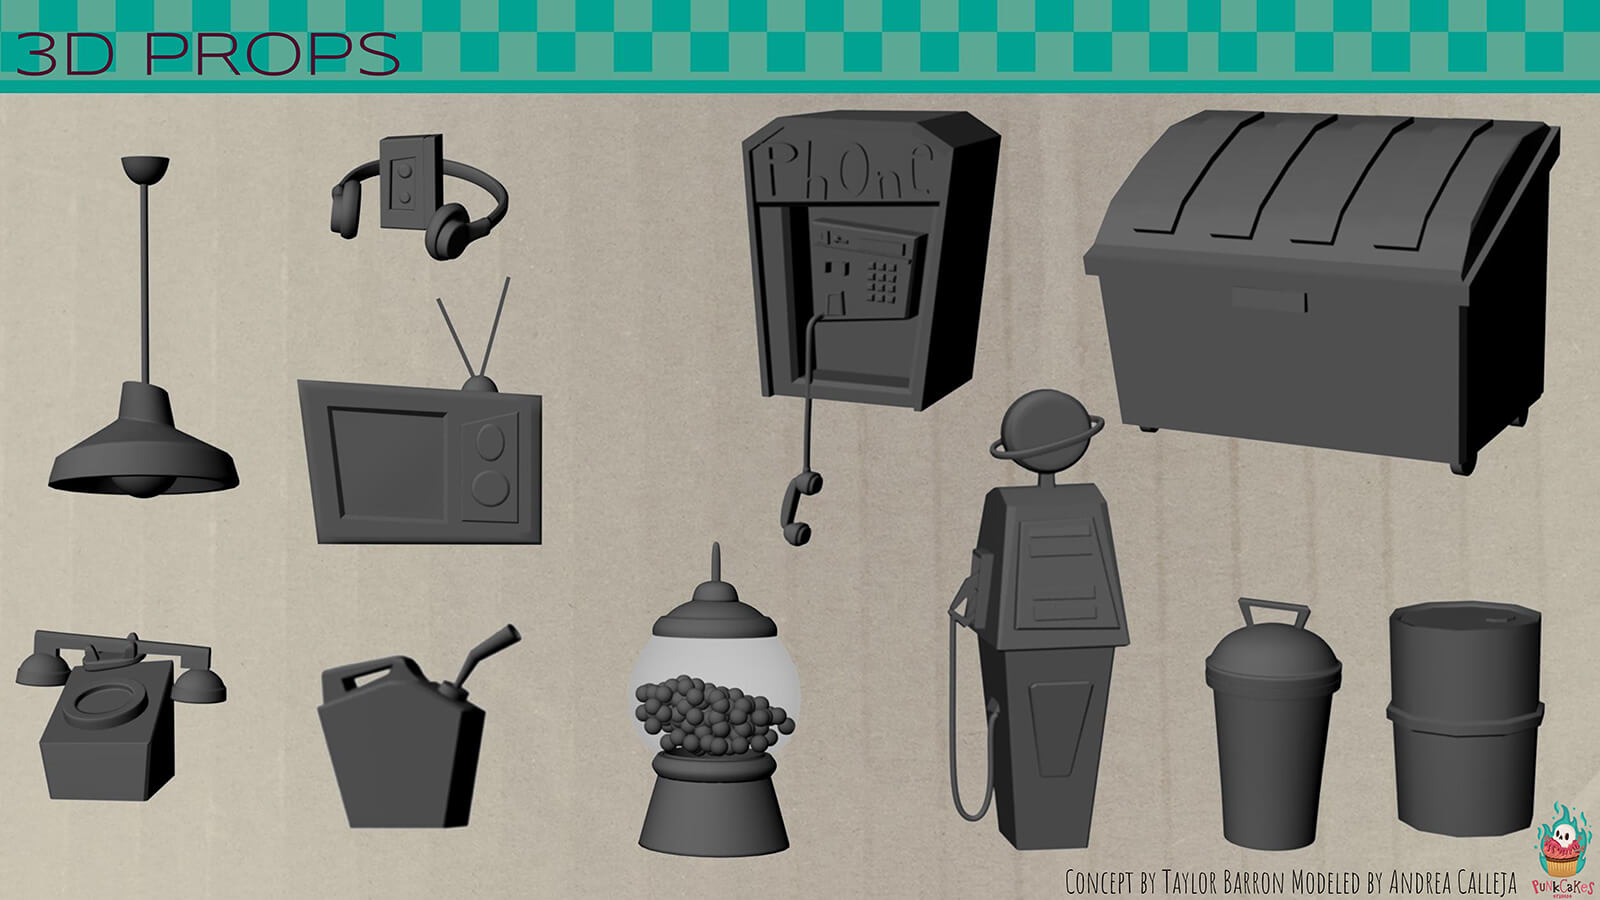 Untextured 3D props from the film, including a lamp, telephones, a dumpster, and more.